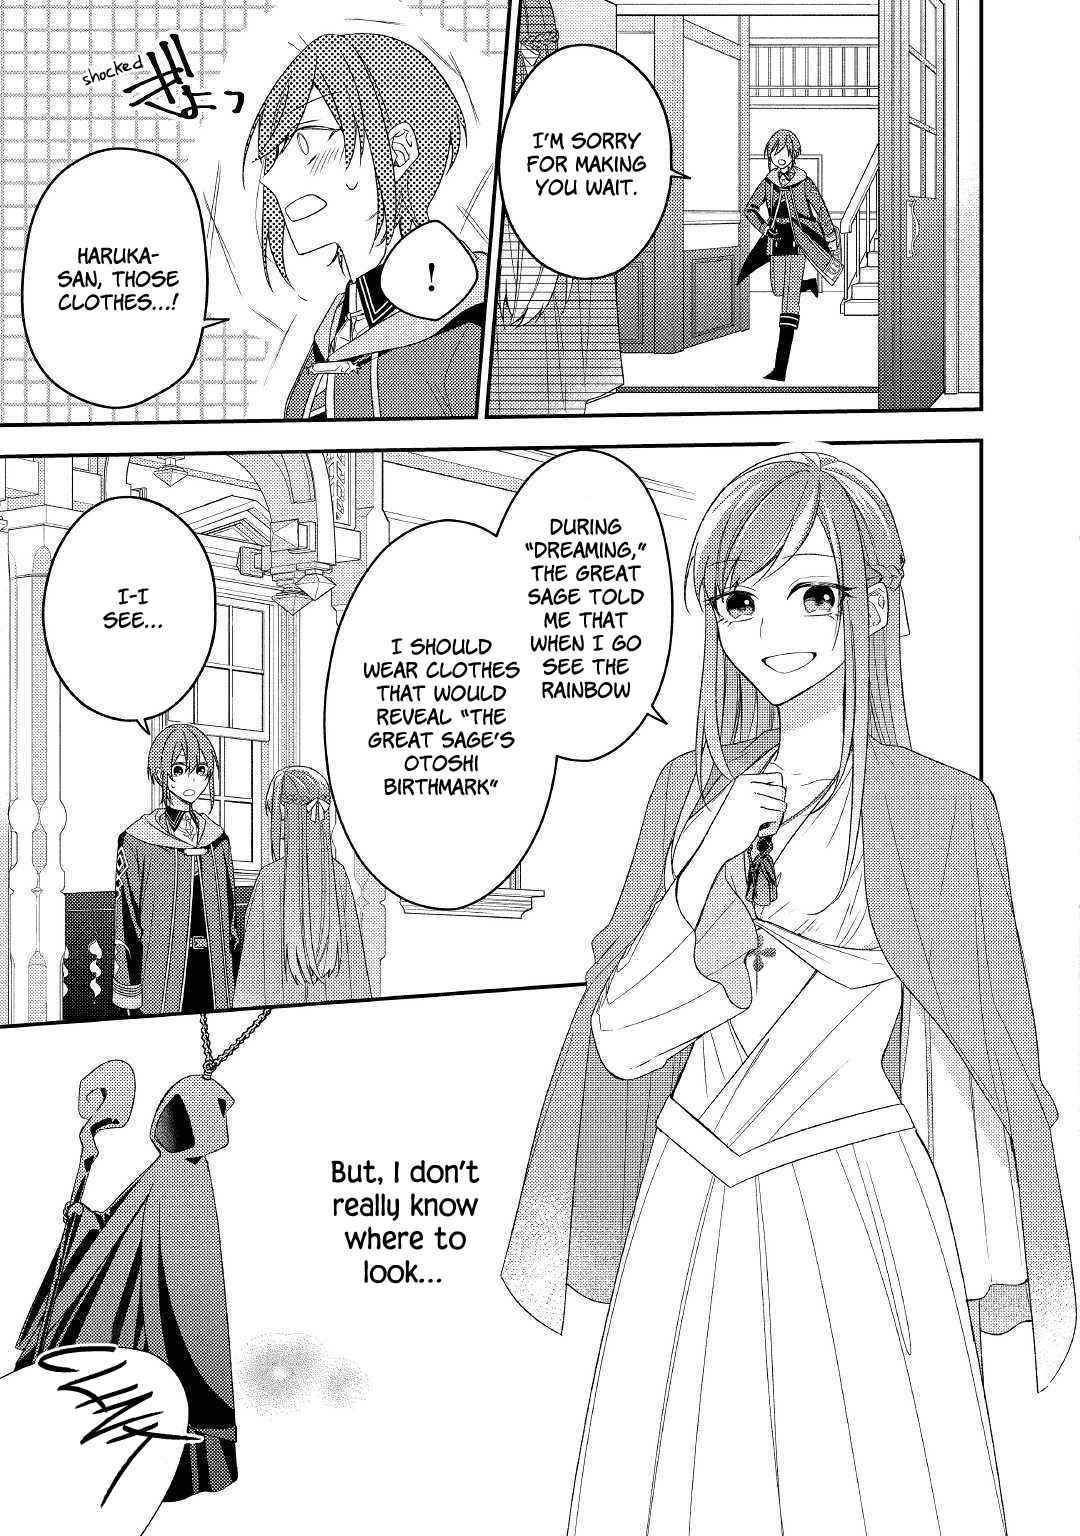 The Mage With Special Circumstances Wants to Live Peacefully Vol. 2 Ch. 10